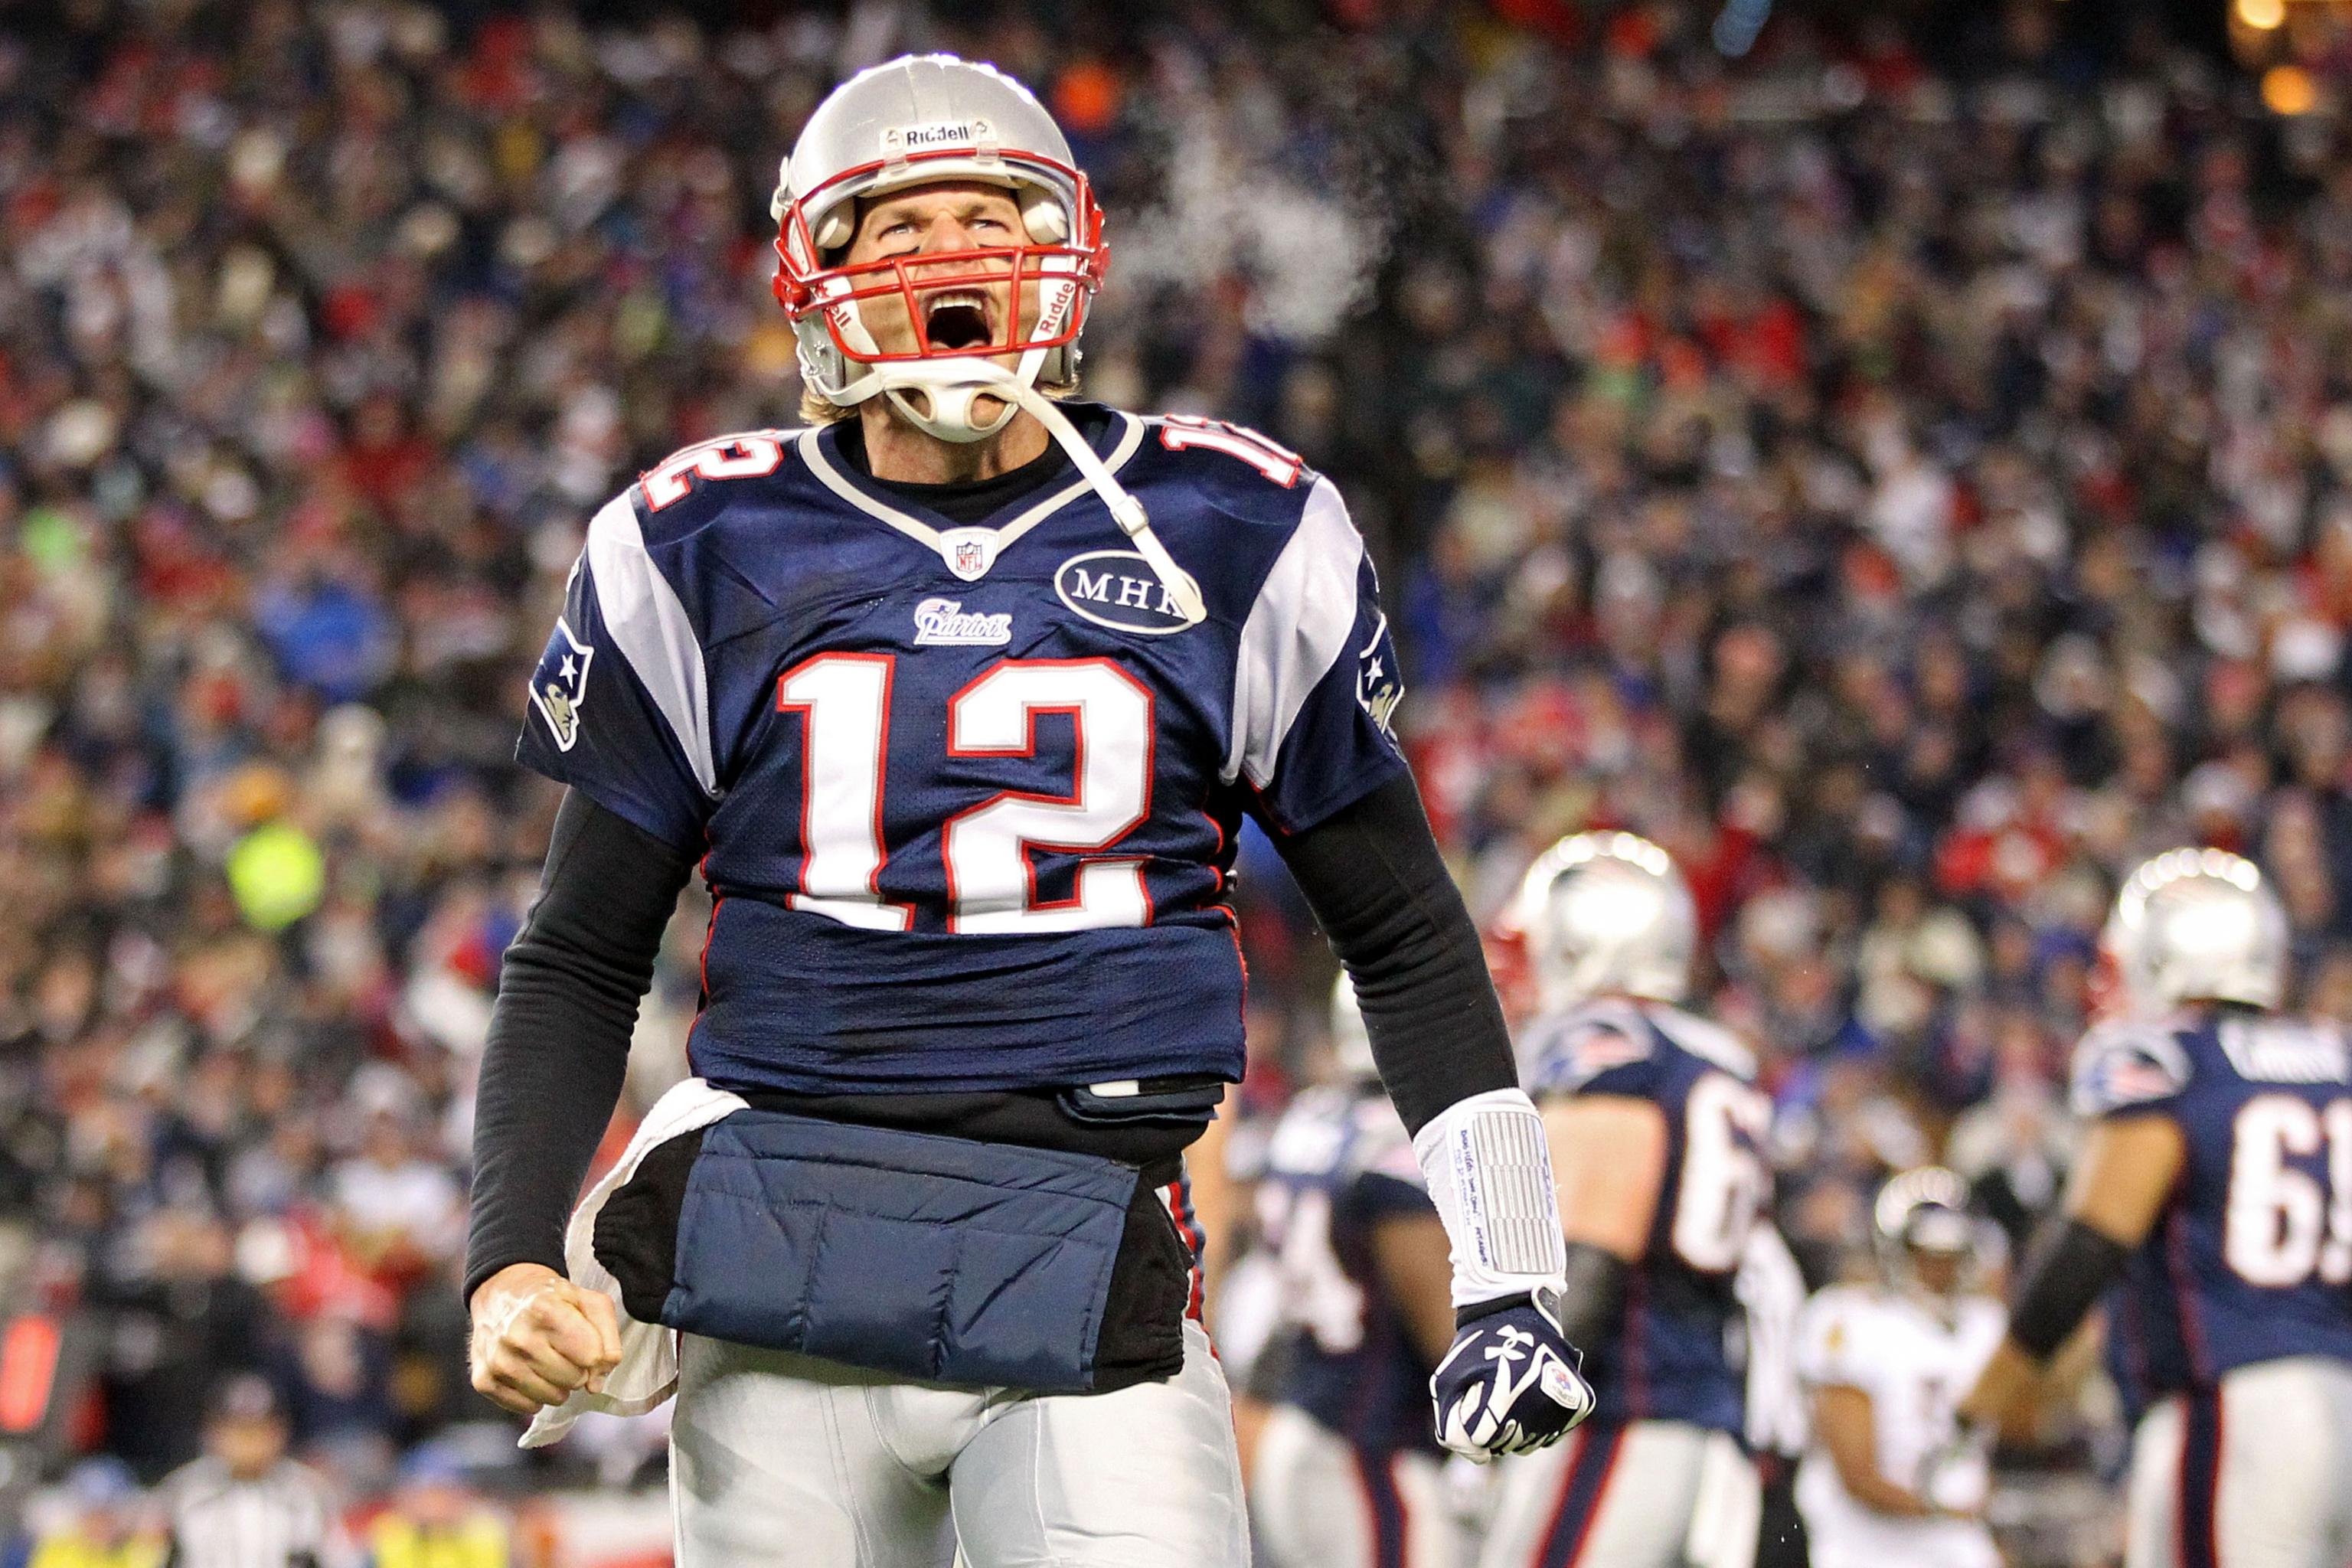 Giants vs. Patriots: Why Tom Brady Will Get His 4th Ring